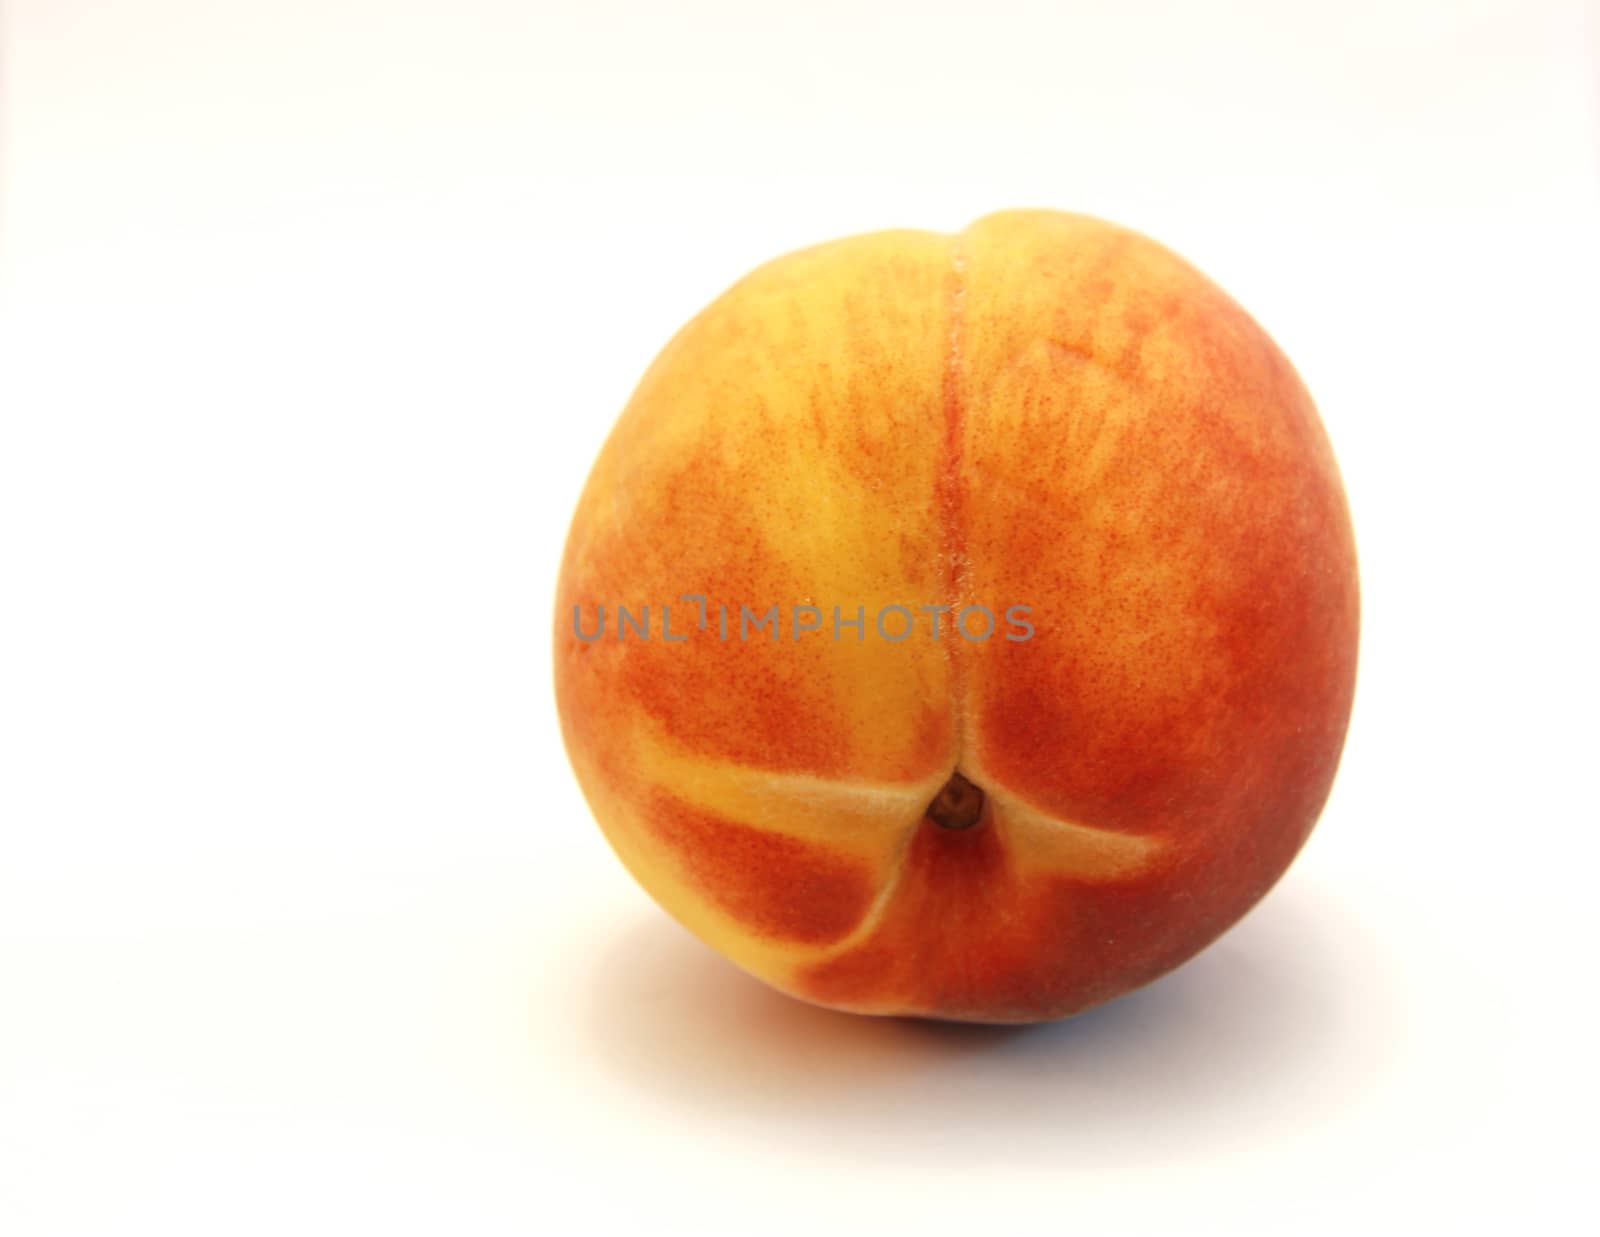 Fresh Peach Isolated On The White Background